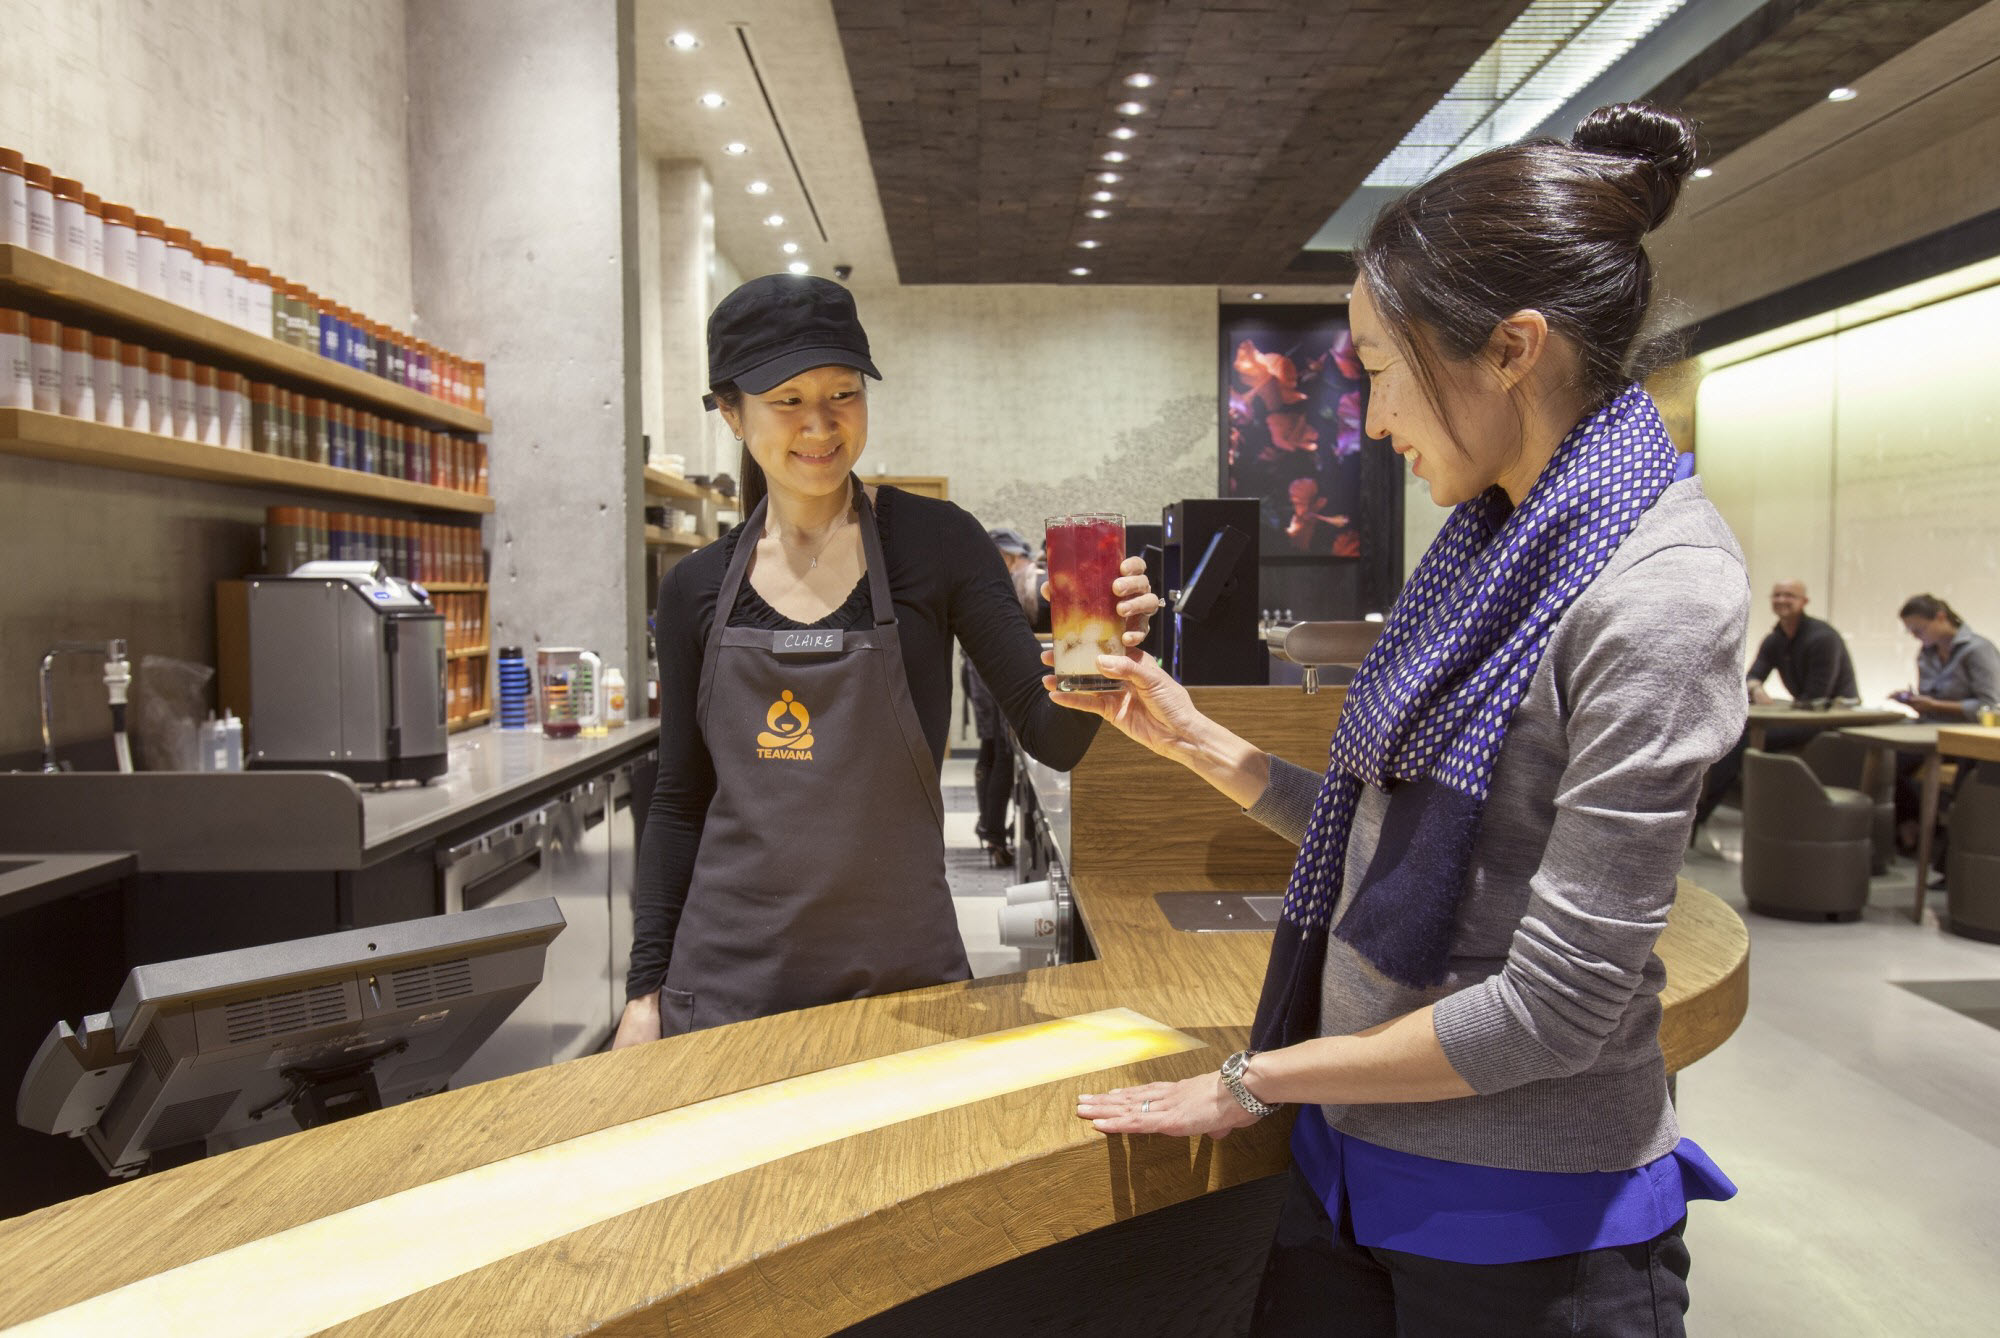 Teavana service bar offers the store's entire selection of loose leaf tea.